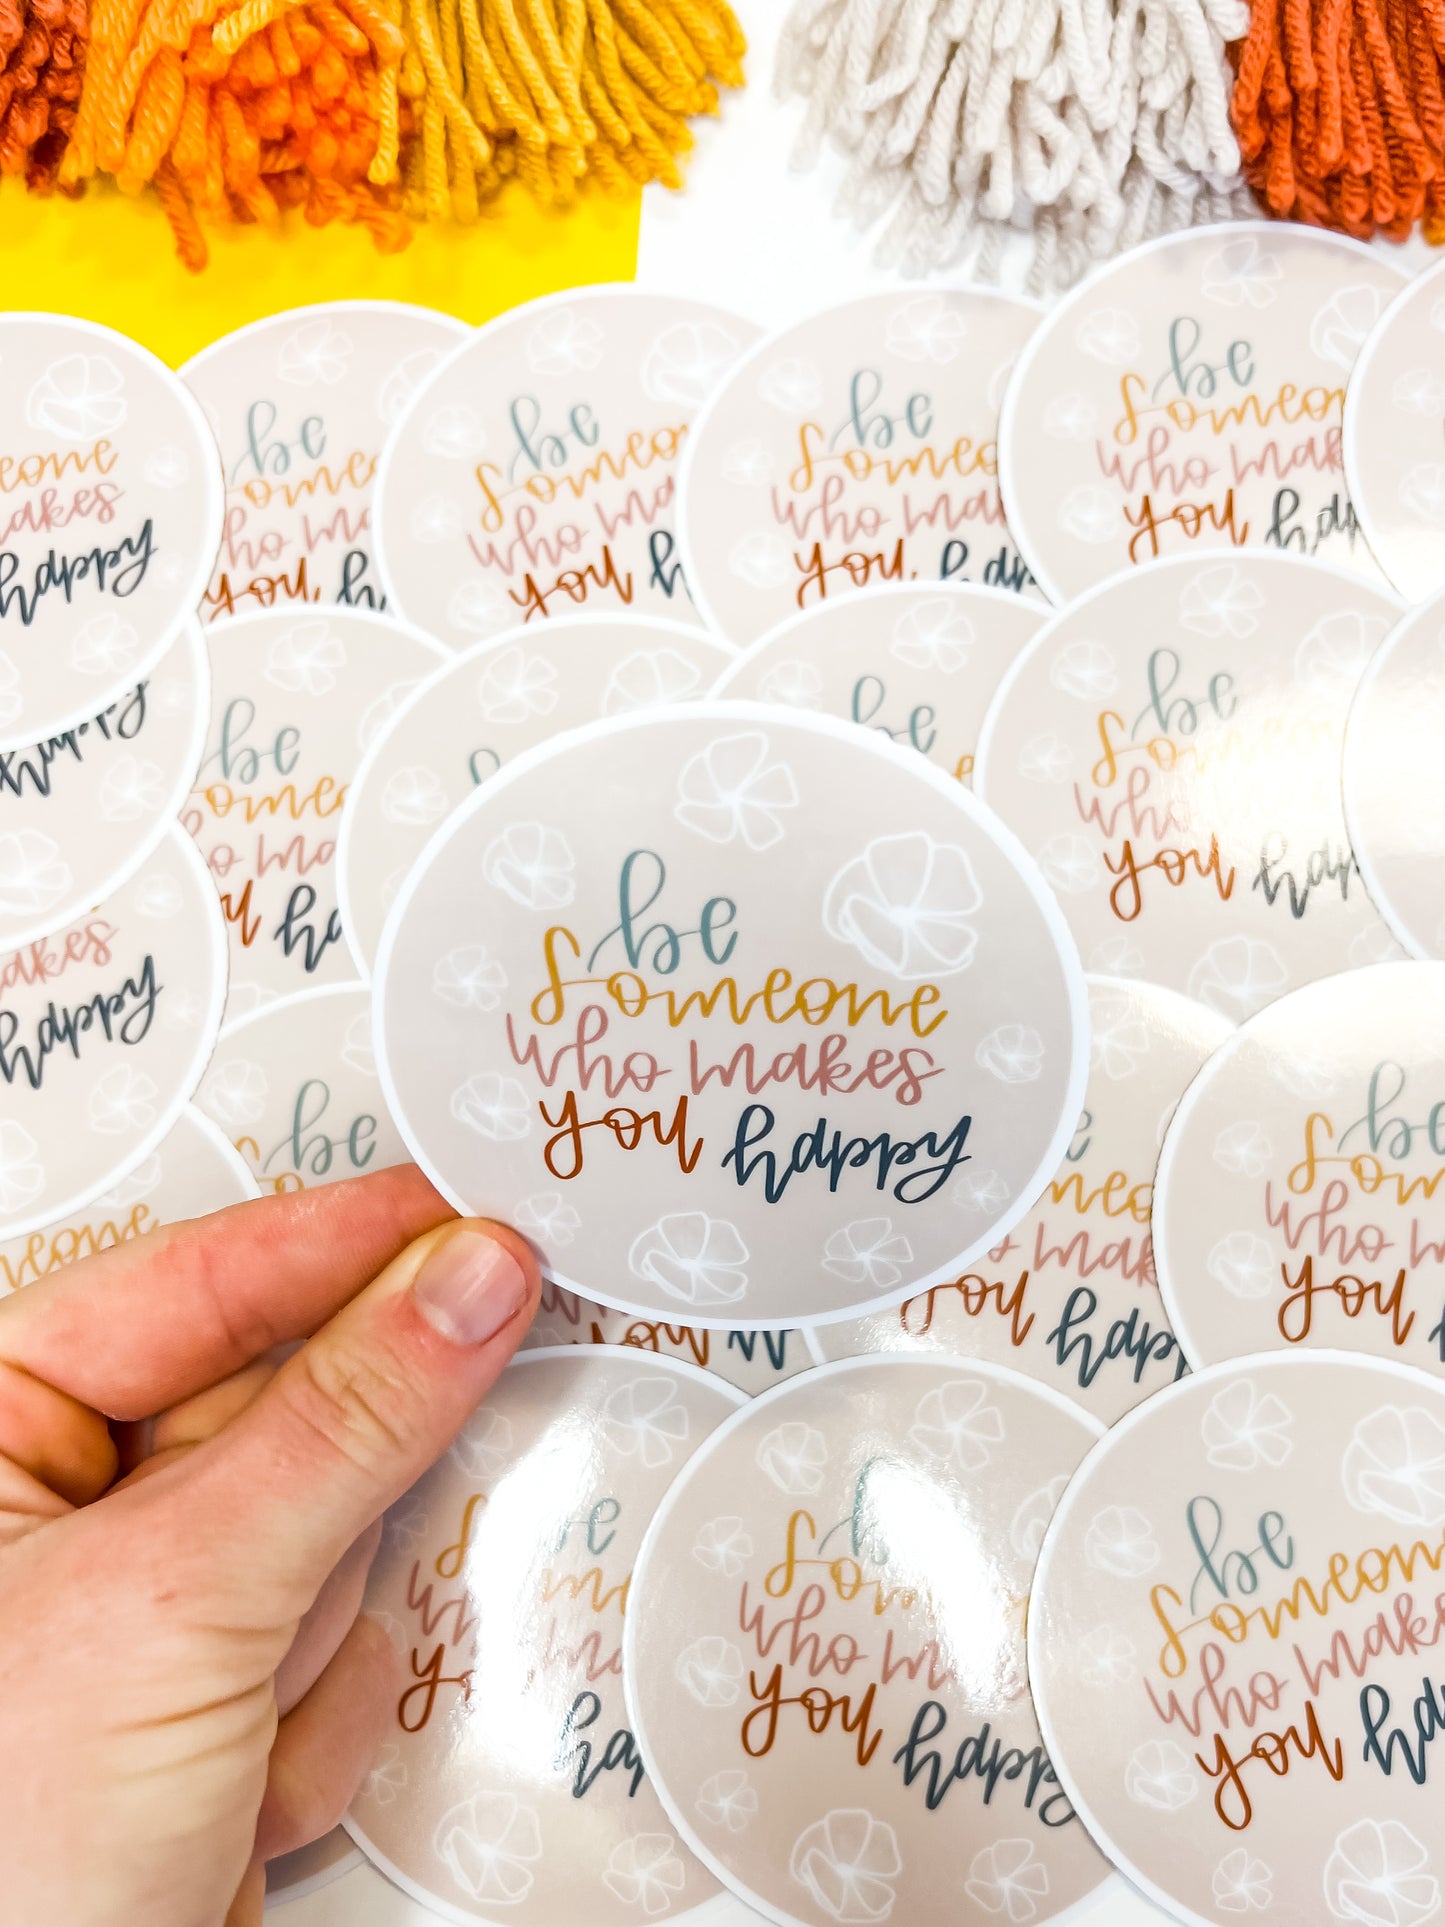 Be Someone Who Makes You Happy Circle Sticker.